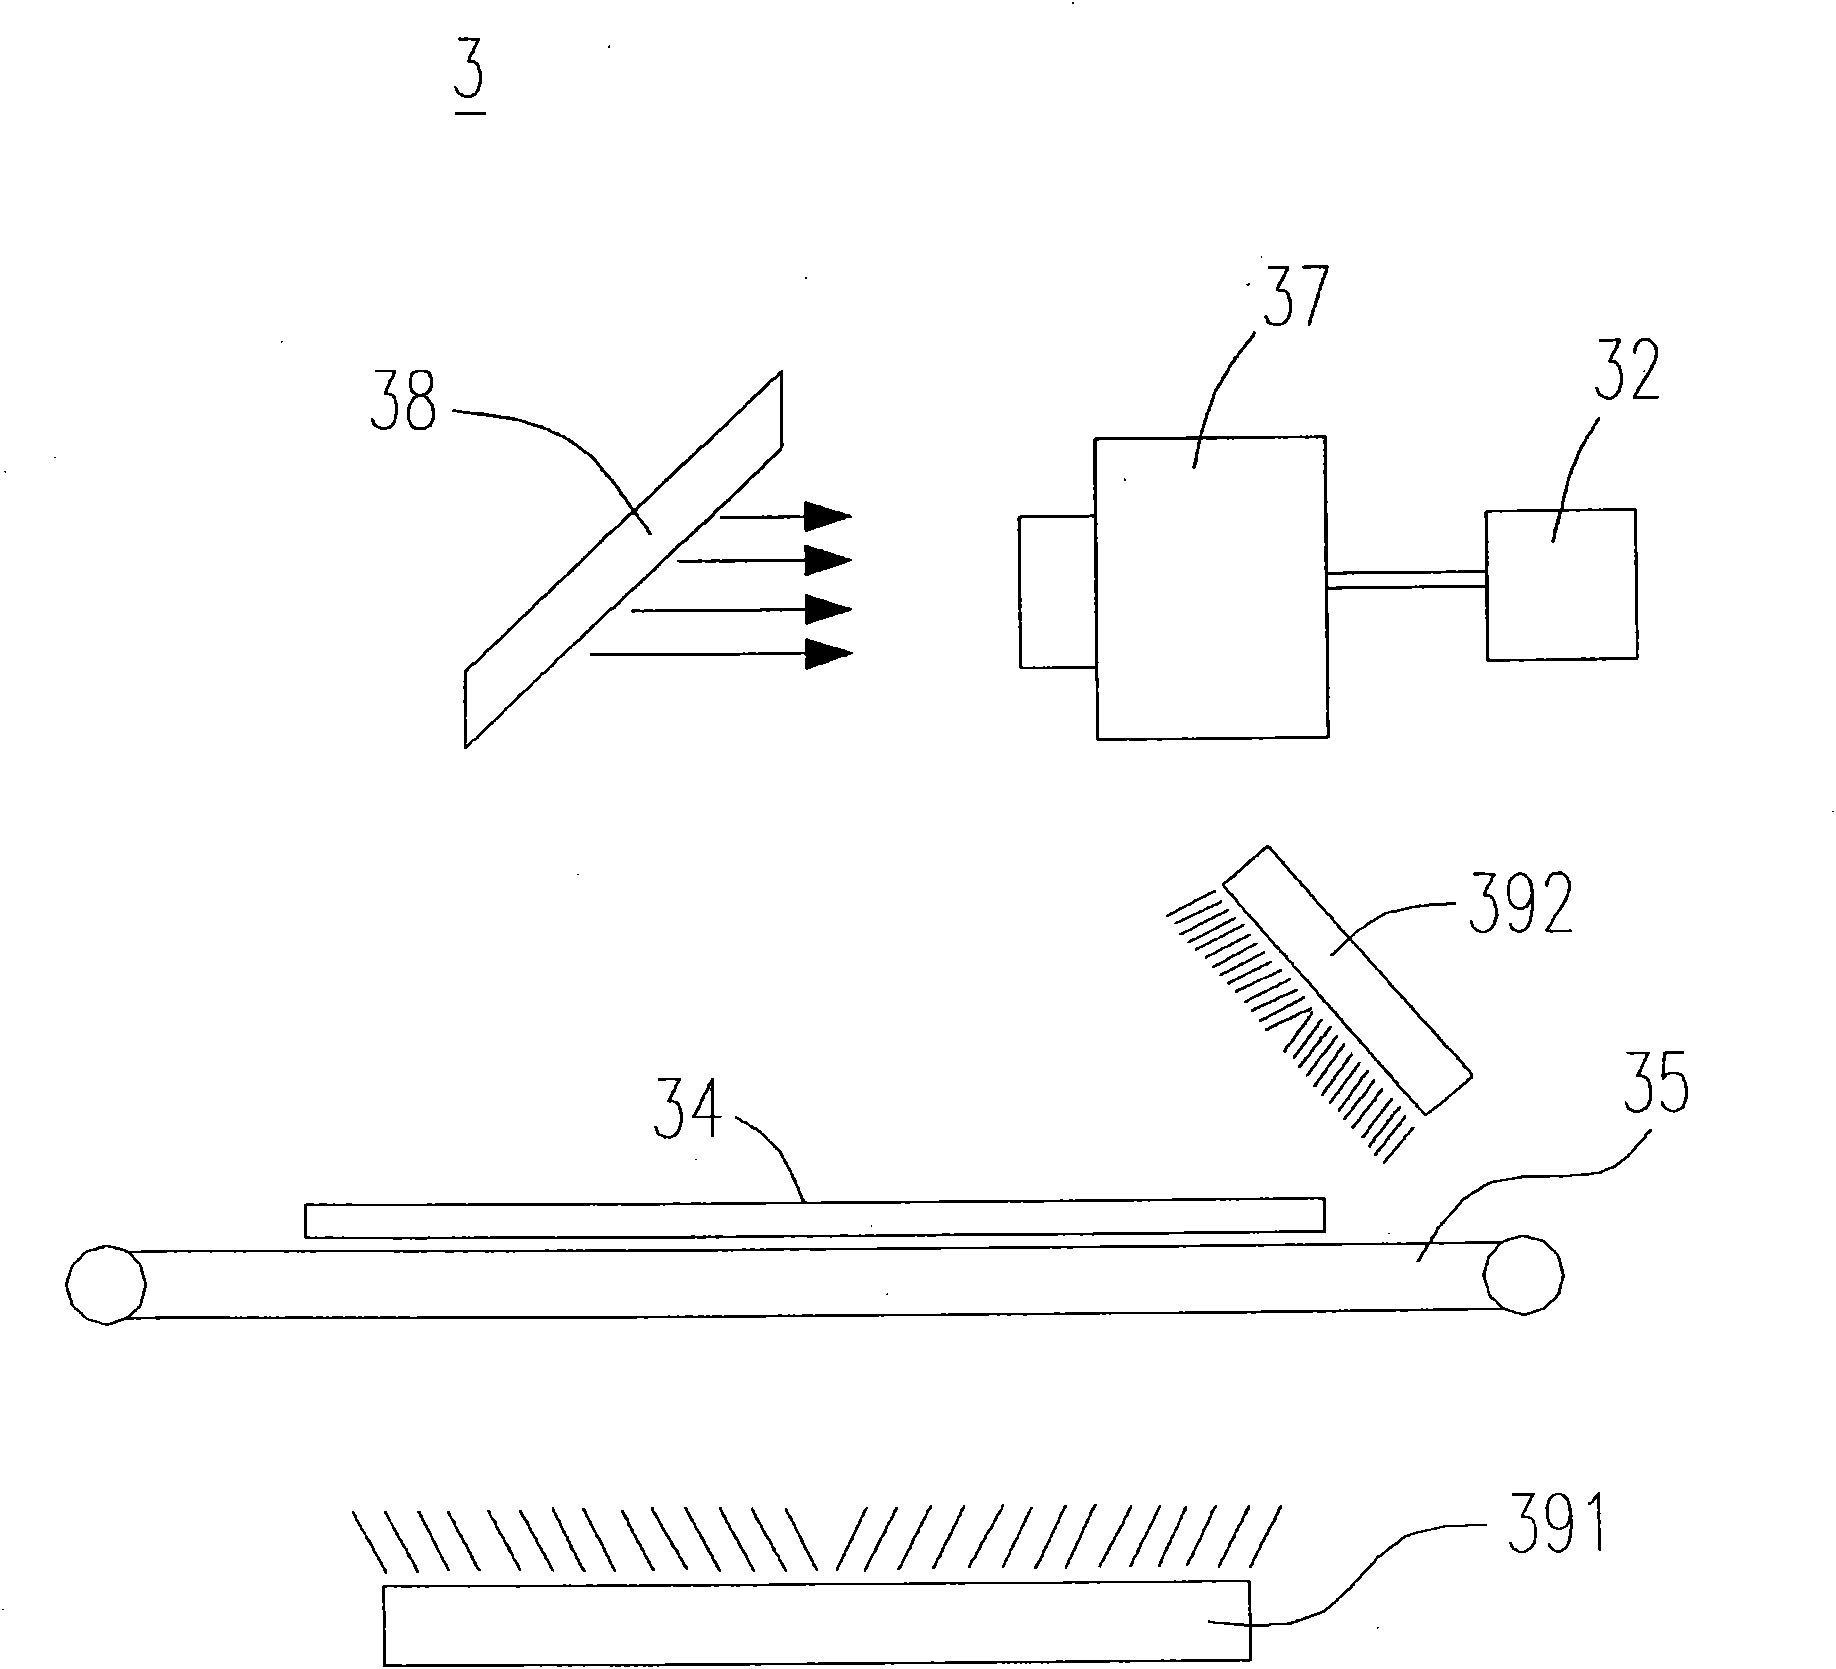 Optical detection equipment and method